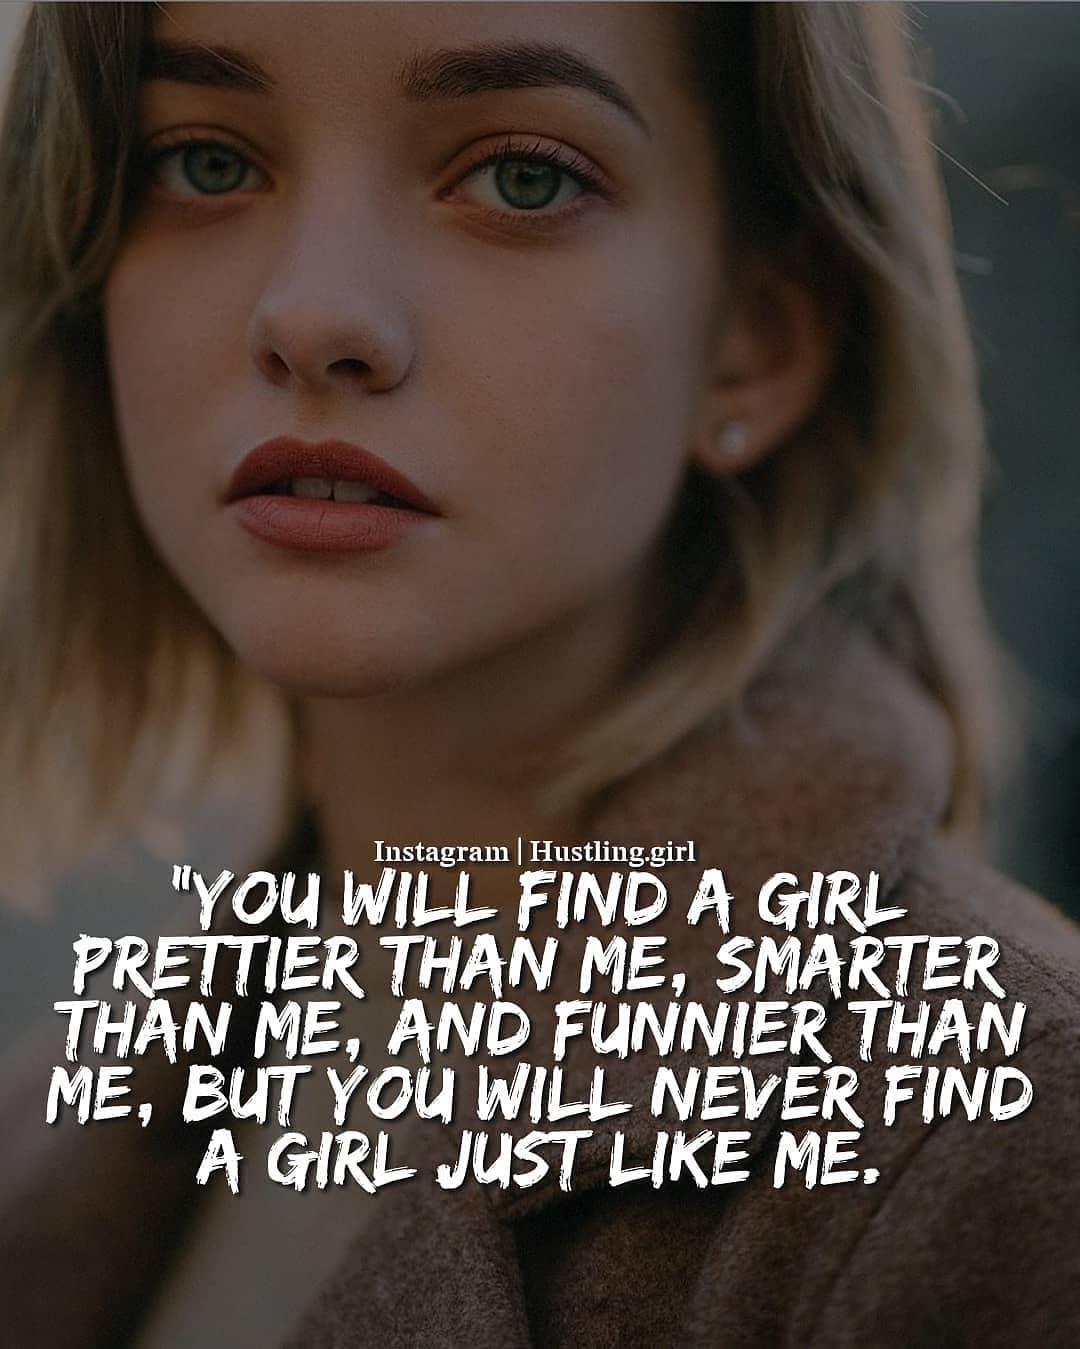 You will find a girl prettier than me, smarter than me, and funnier than me, but you will never find a girl just like me.